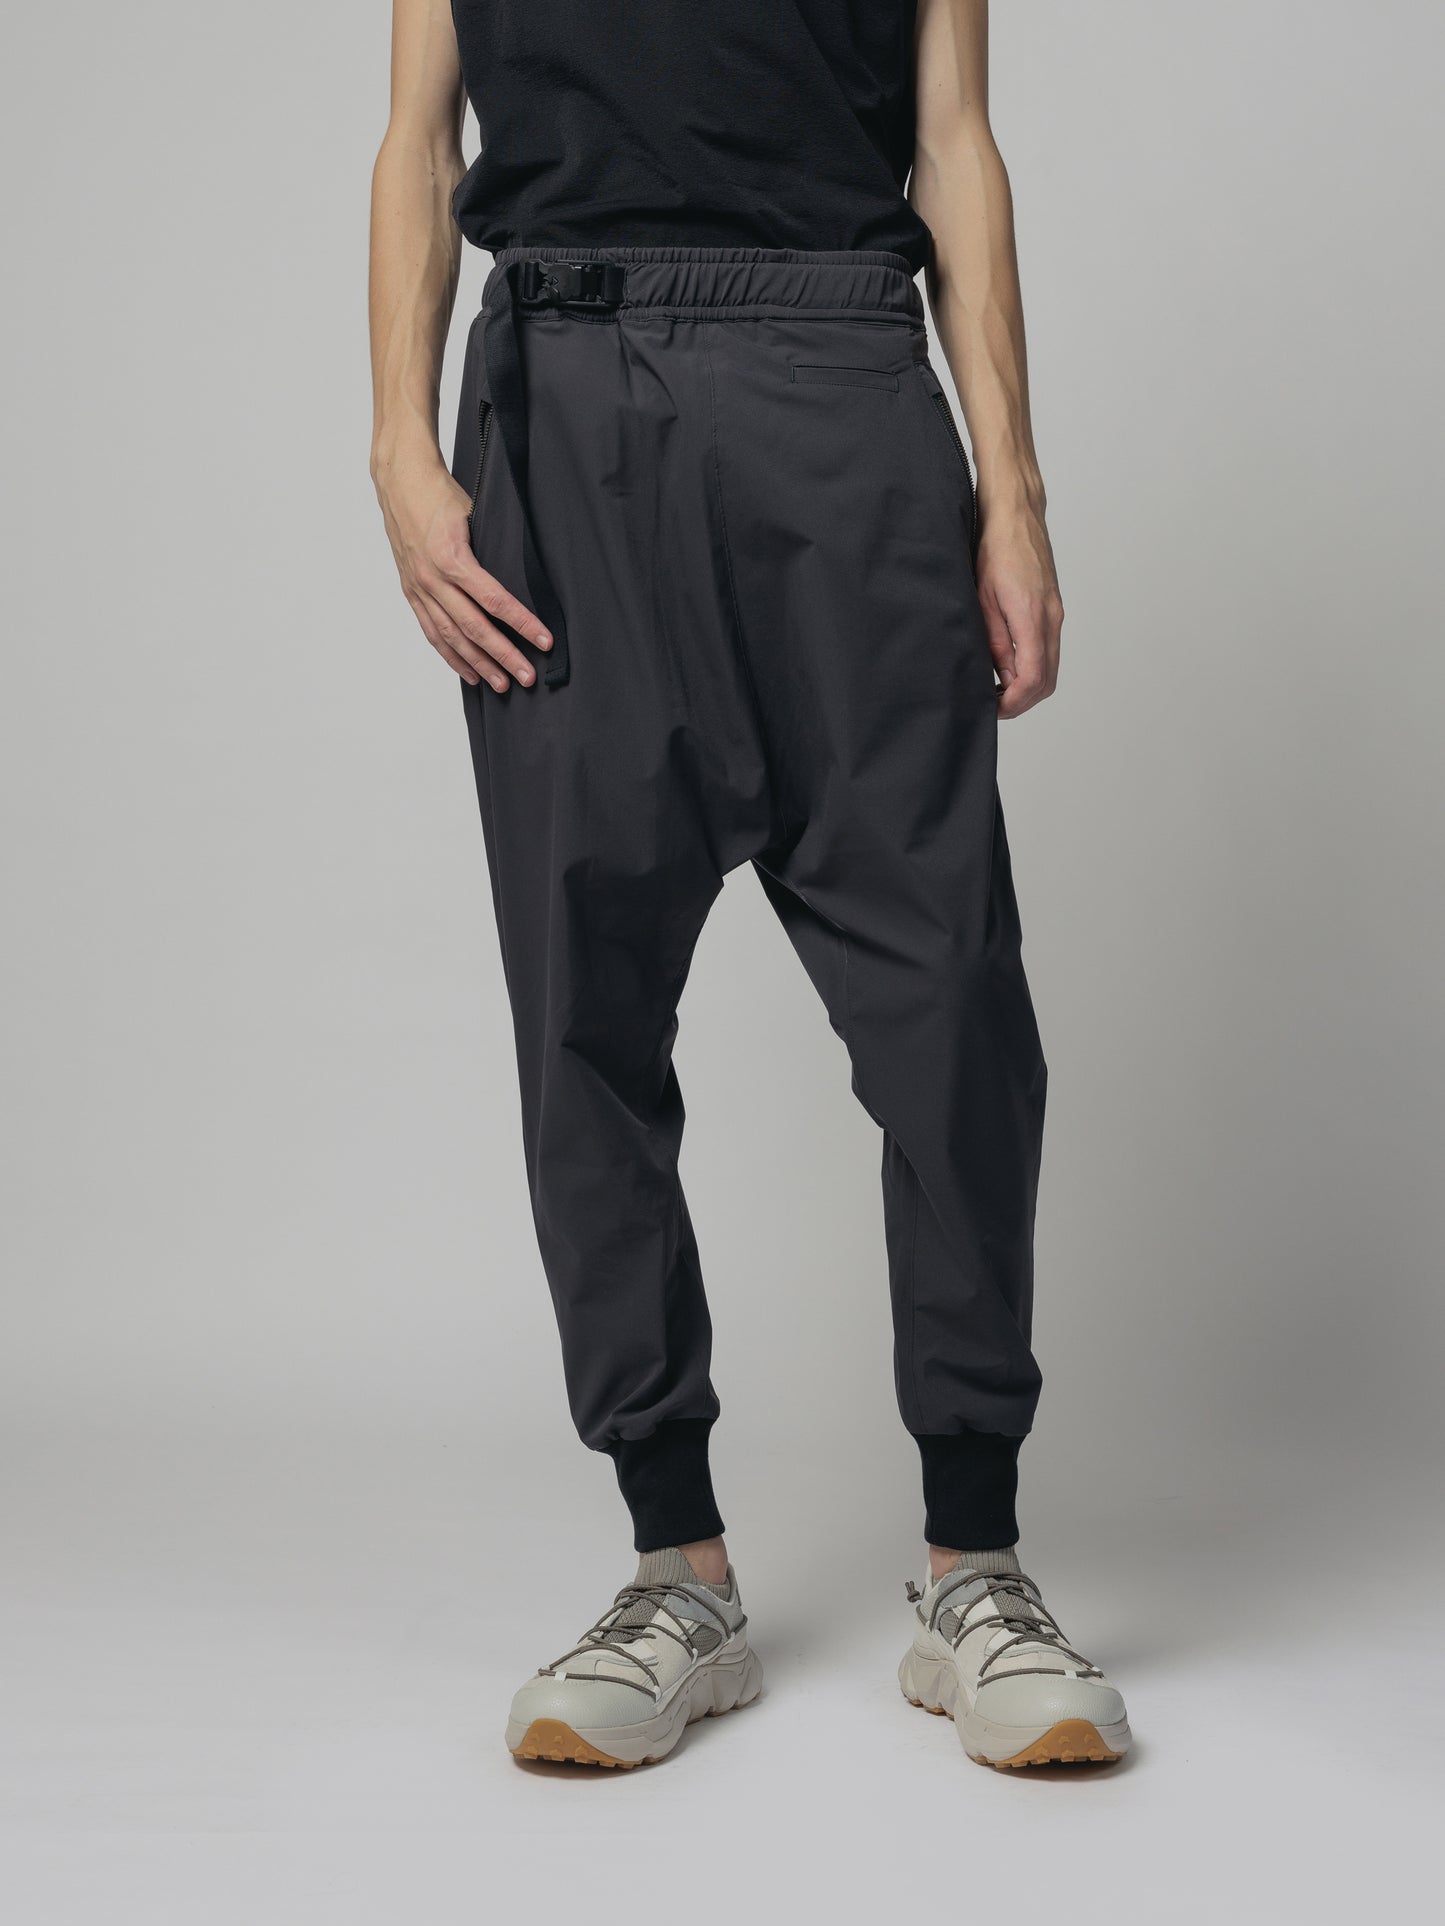 
                  
                    WATER-REPELLENT RIBED PANTS
                  
                